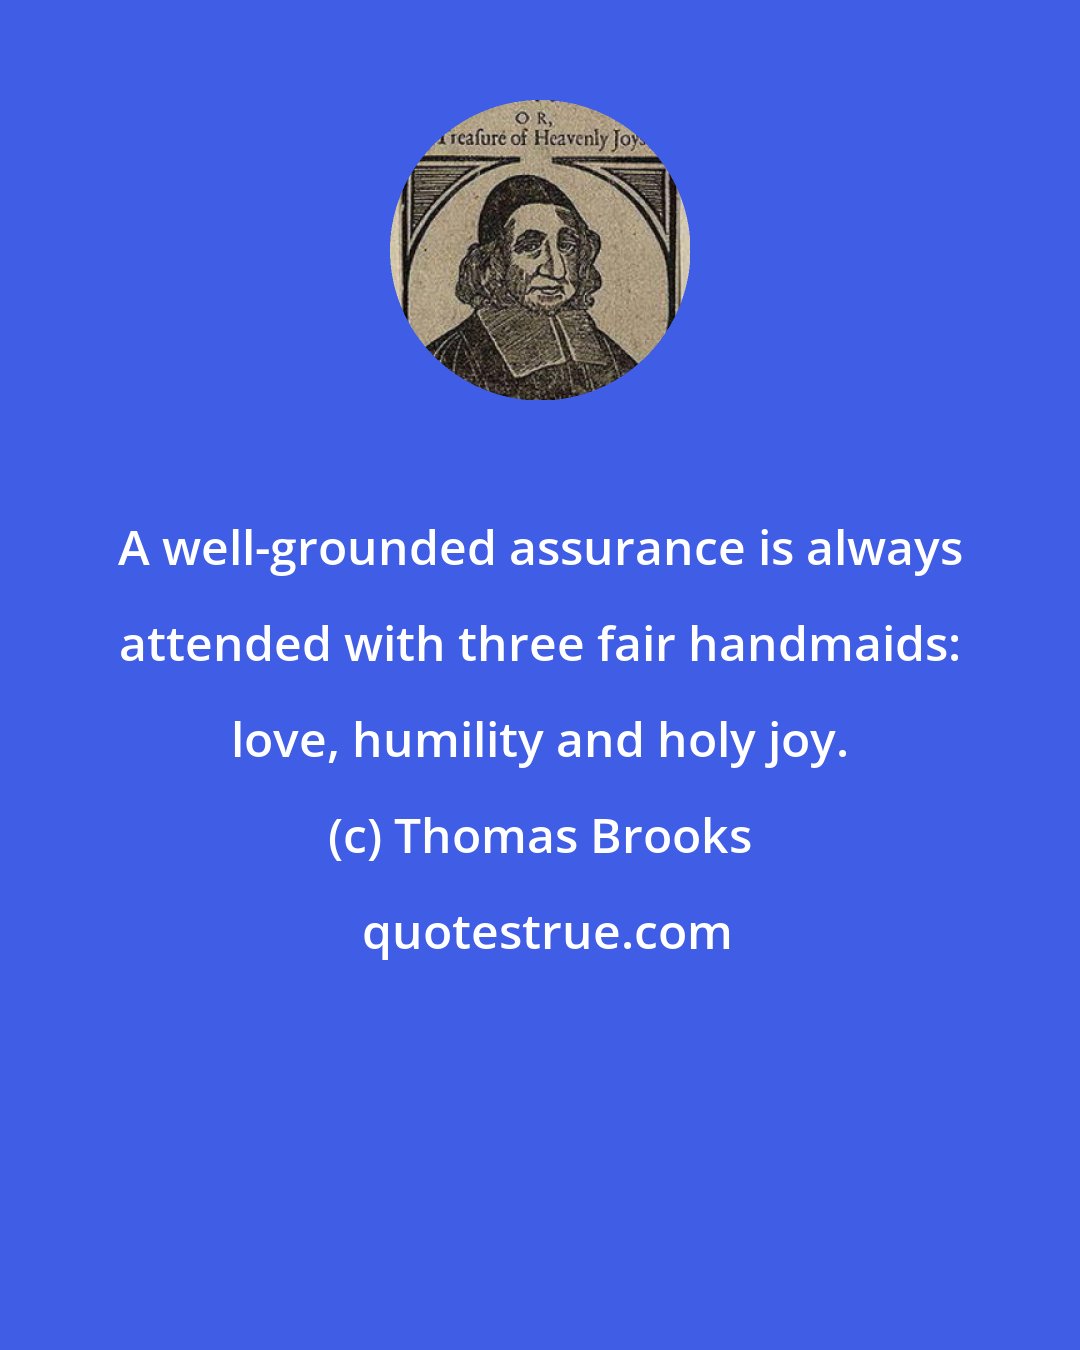 Thomas Brooks: A well-grounded assurance is always attended with three fair handmaids: love, humility and holy joy.